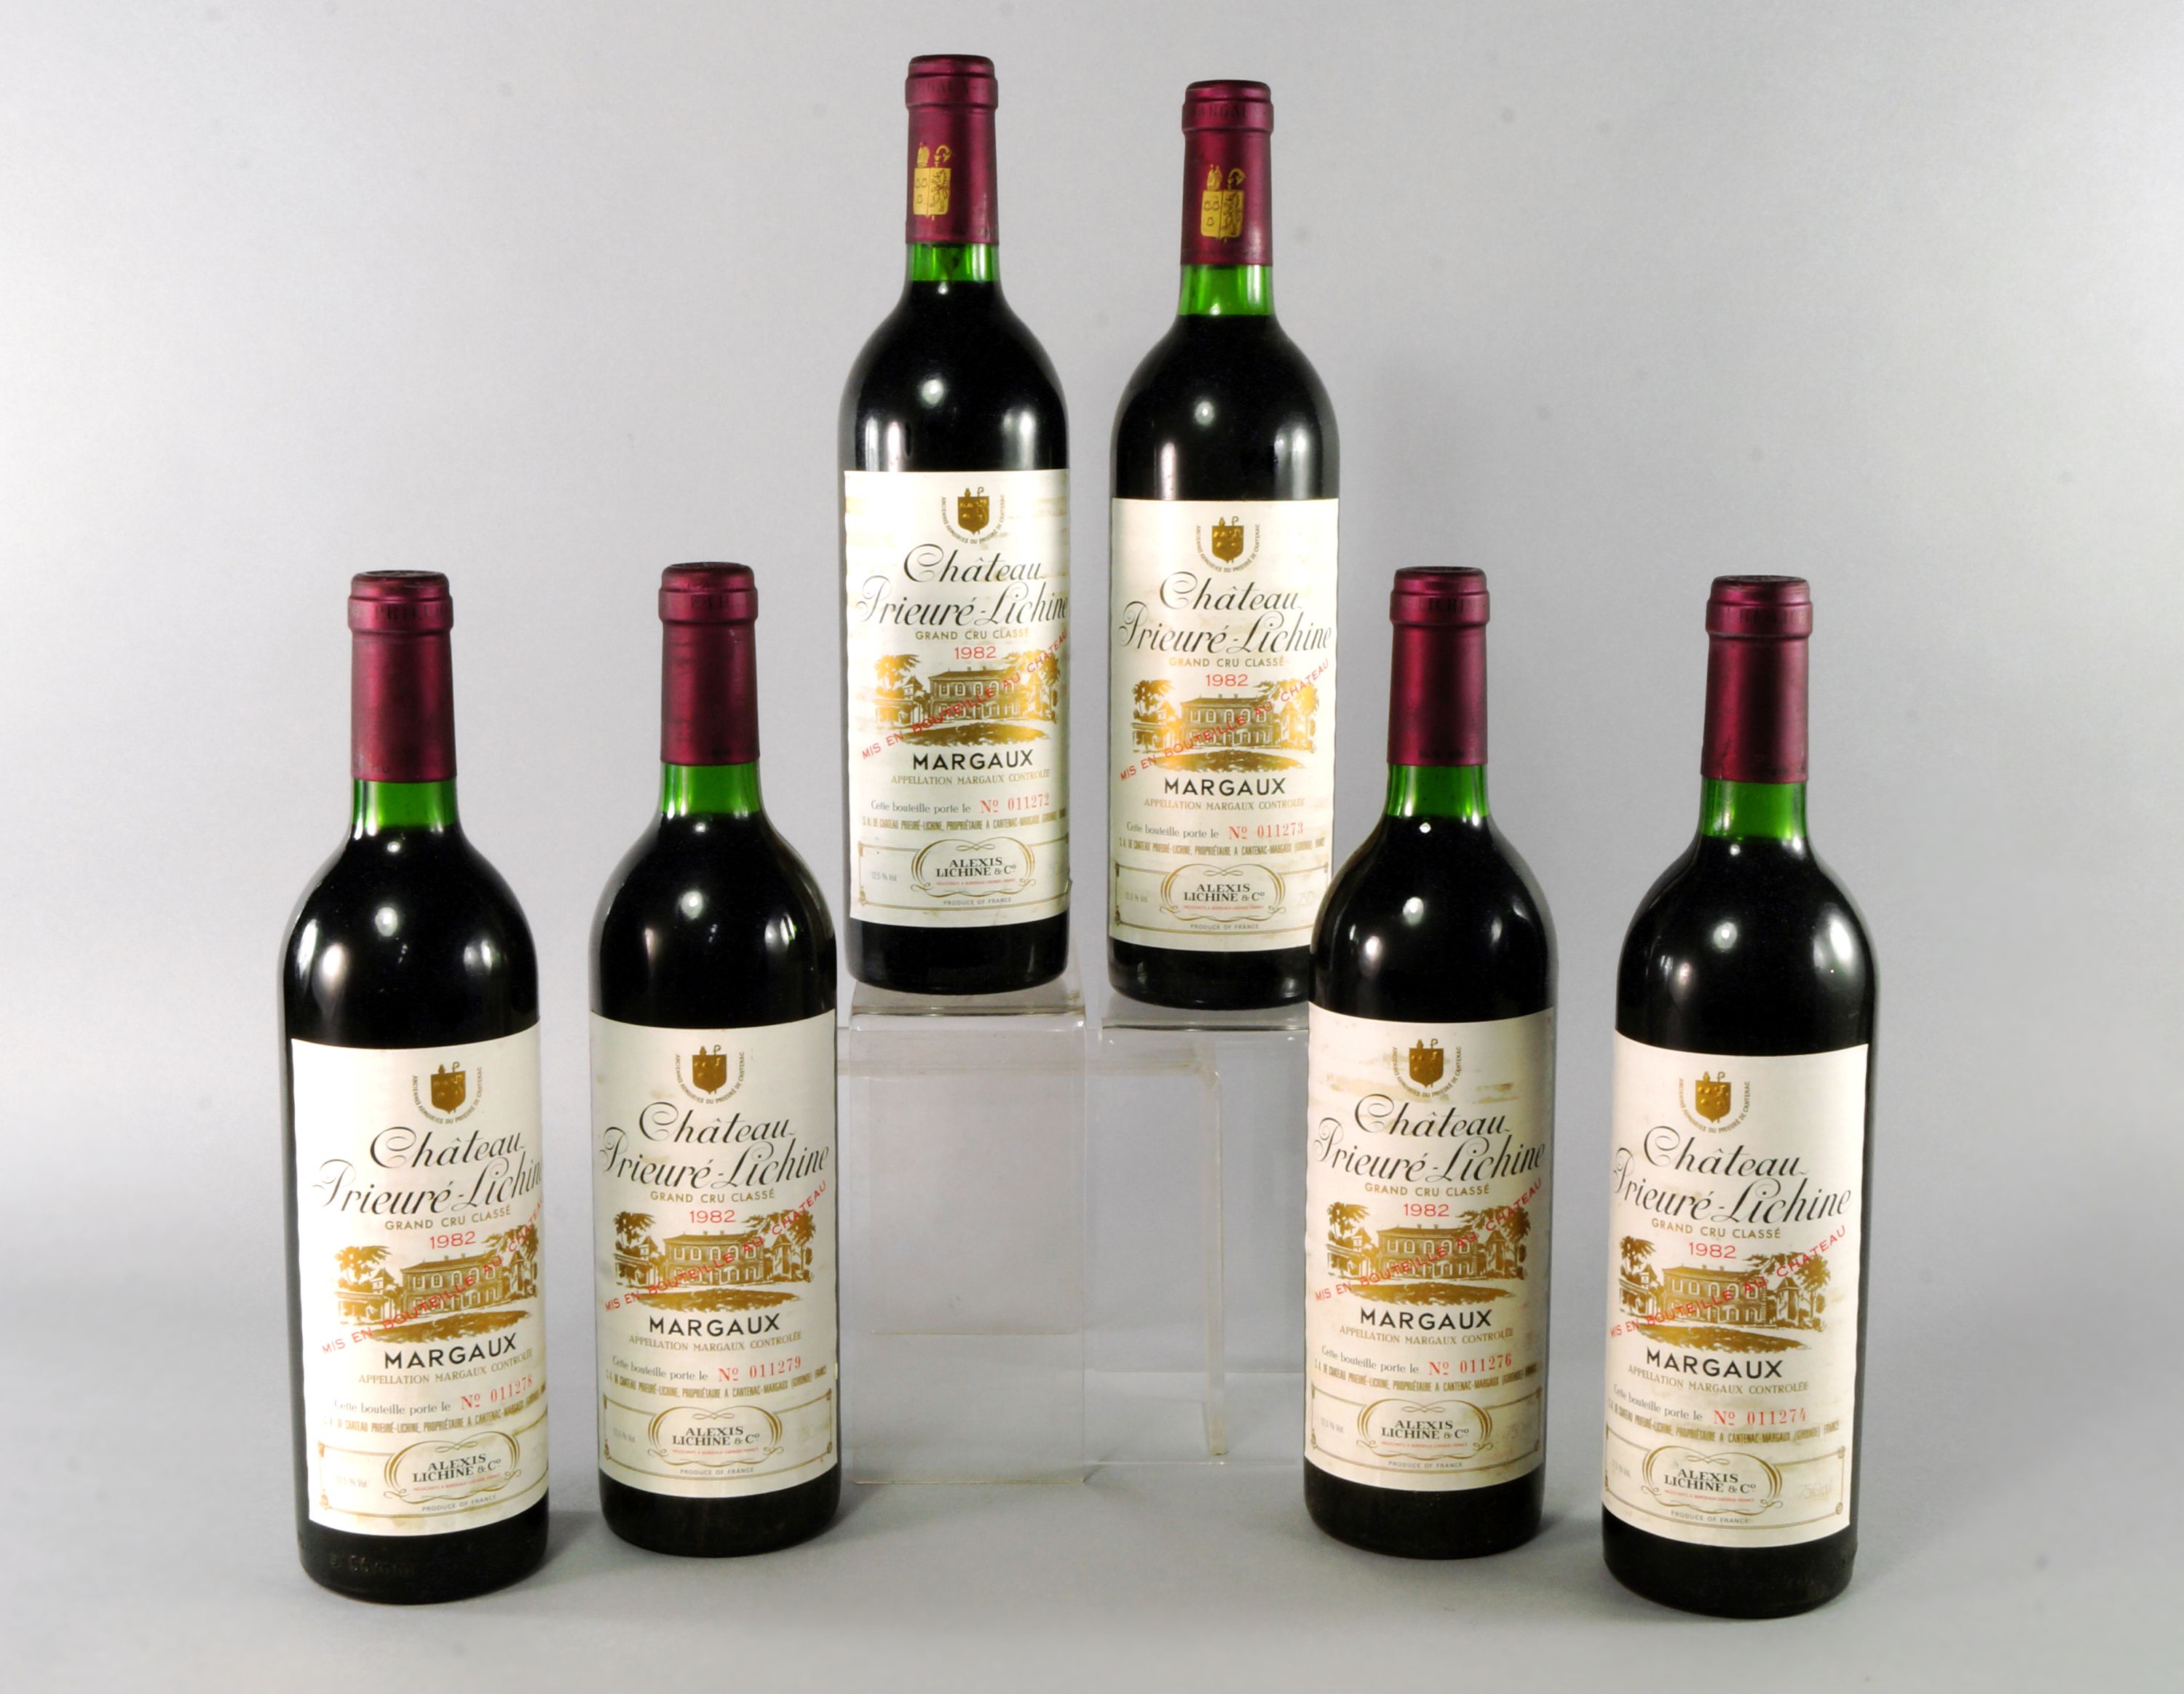 Six bottles of Chateau Prieure Lichine 1982 Grand Cru, ullages to bottom neck,